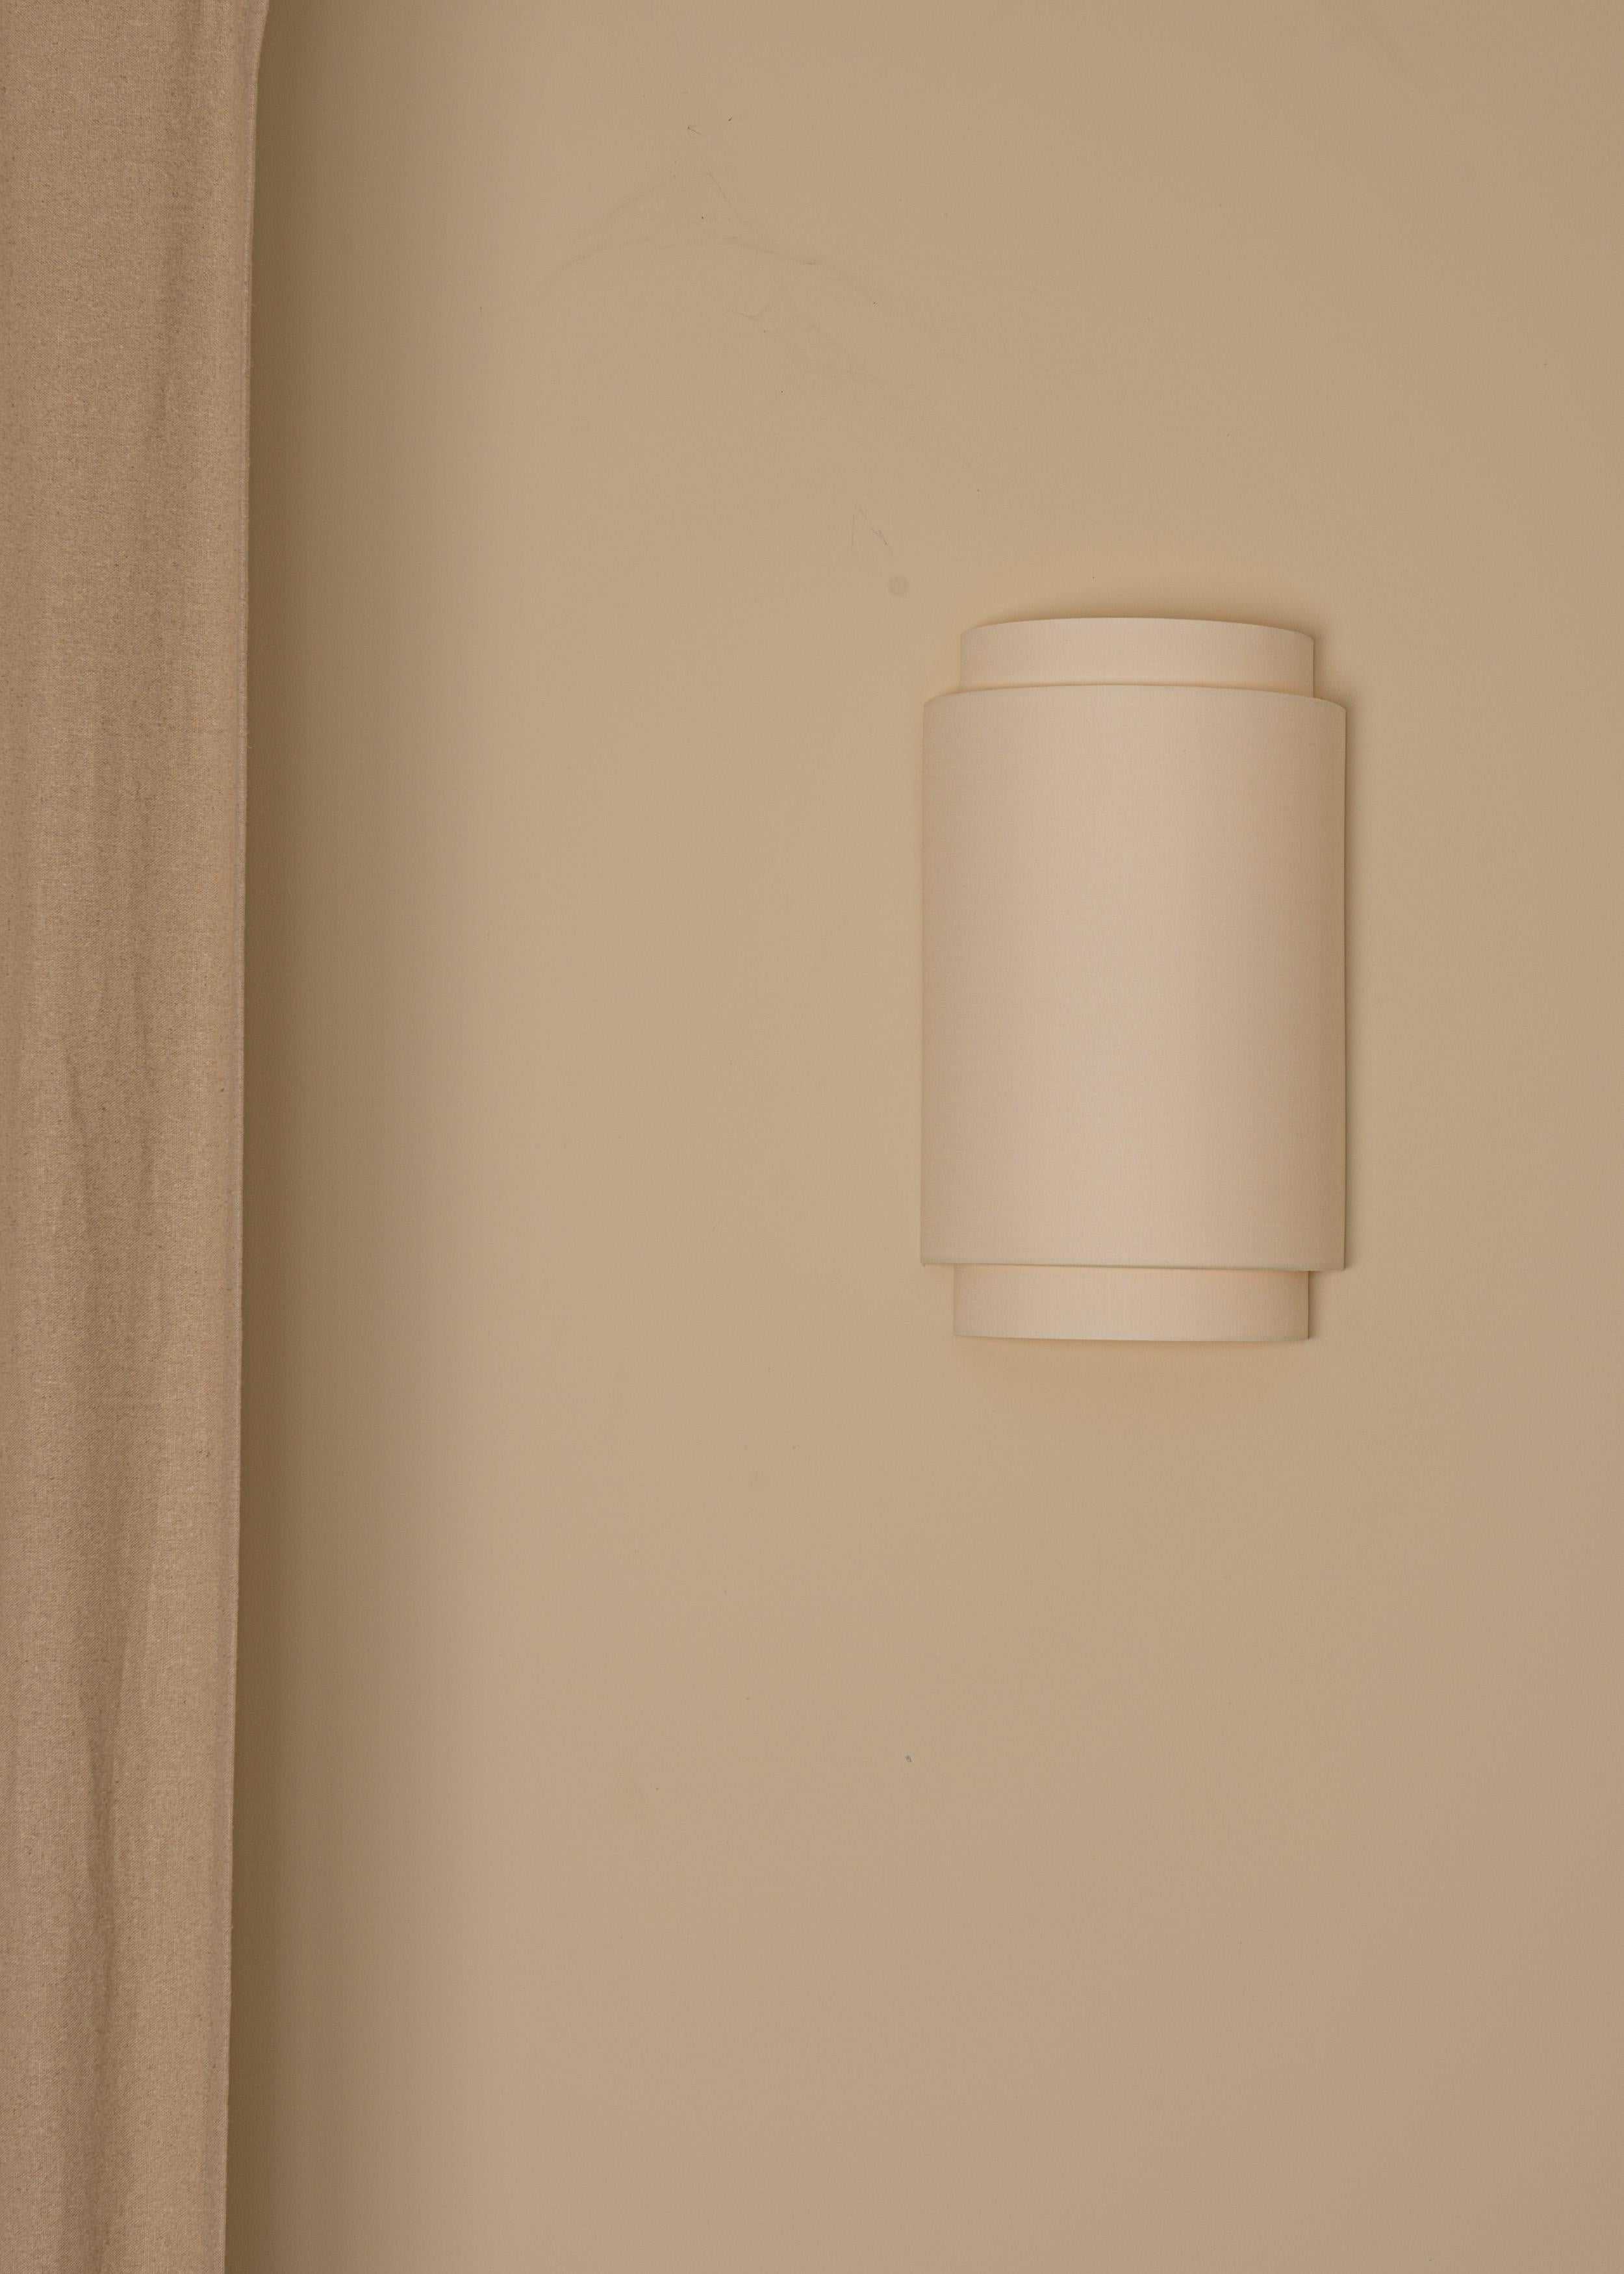 Duono Cotton Wall Sconce by Simone & Marcel
Dimensions: D 12 x W 24 x H 38 cm.
Materials: Cotton.

Custom options available on request. Please contact us. 

All our lamps can be wired according to each country. If sold to the USA it will be wired